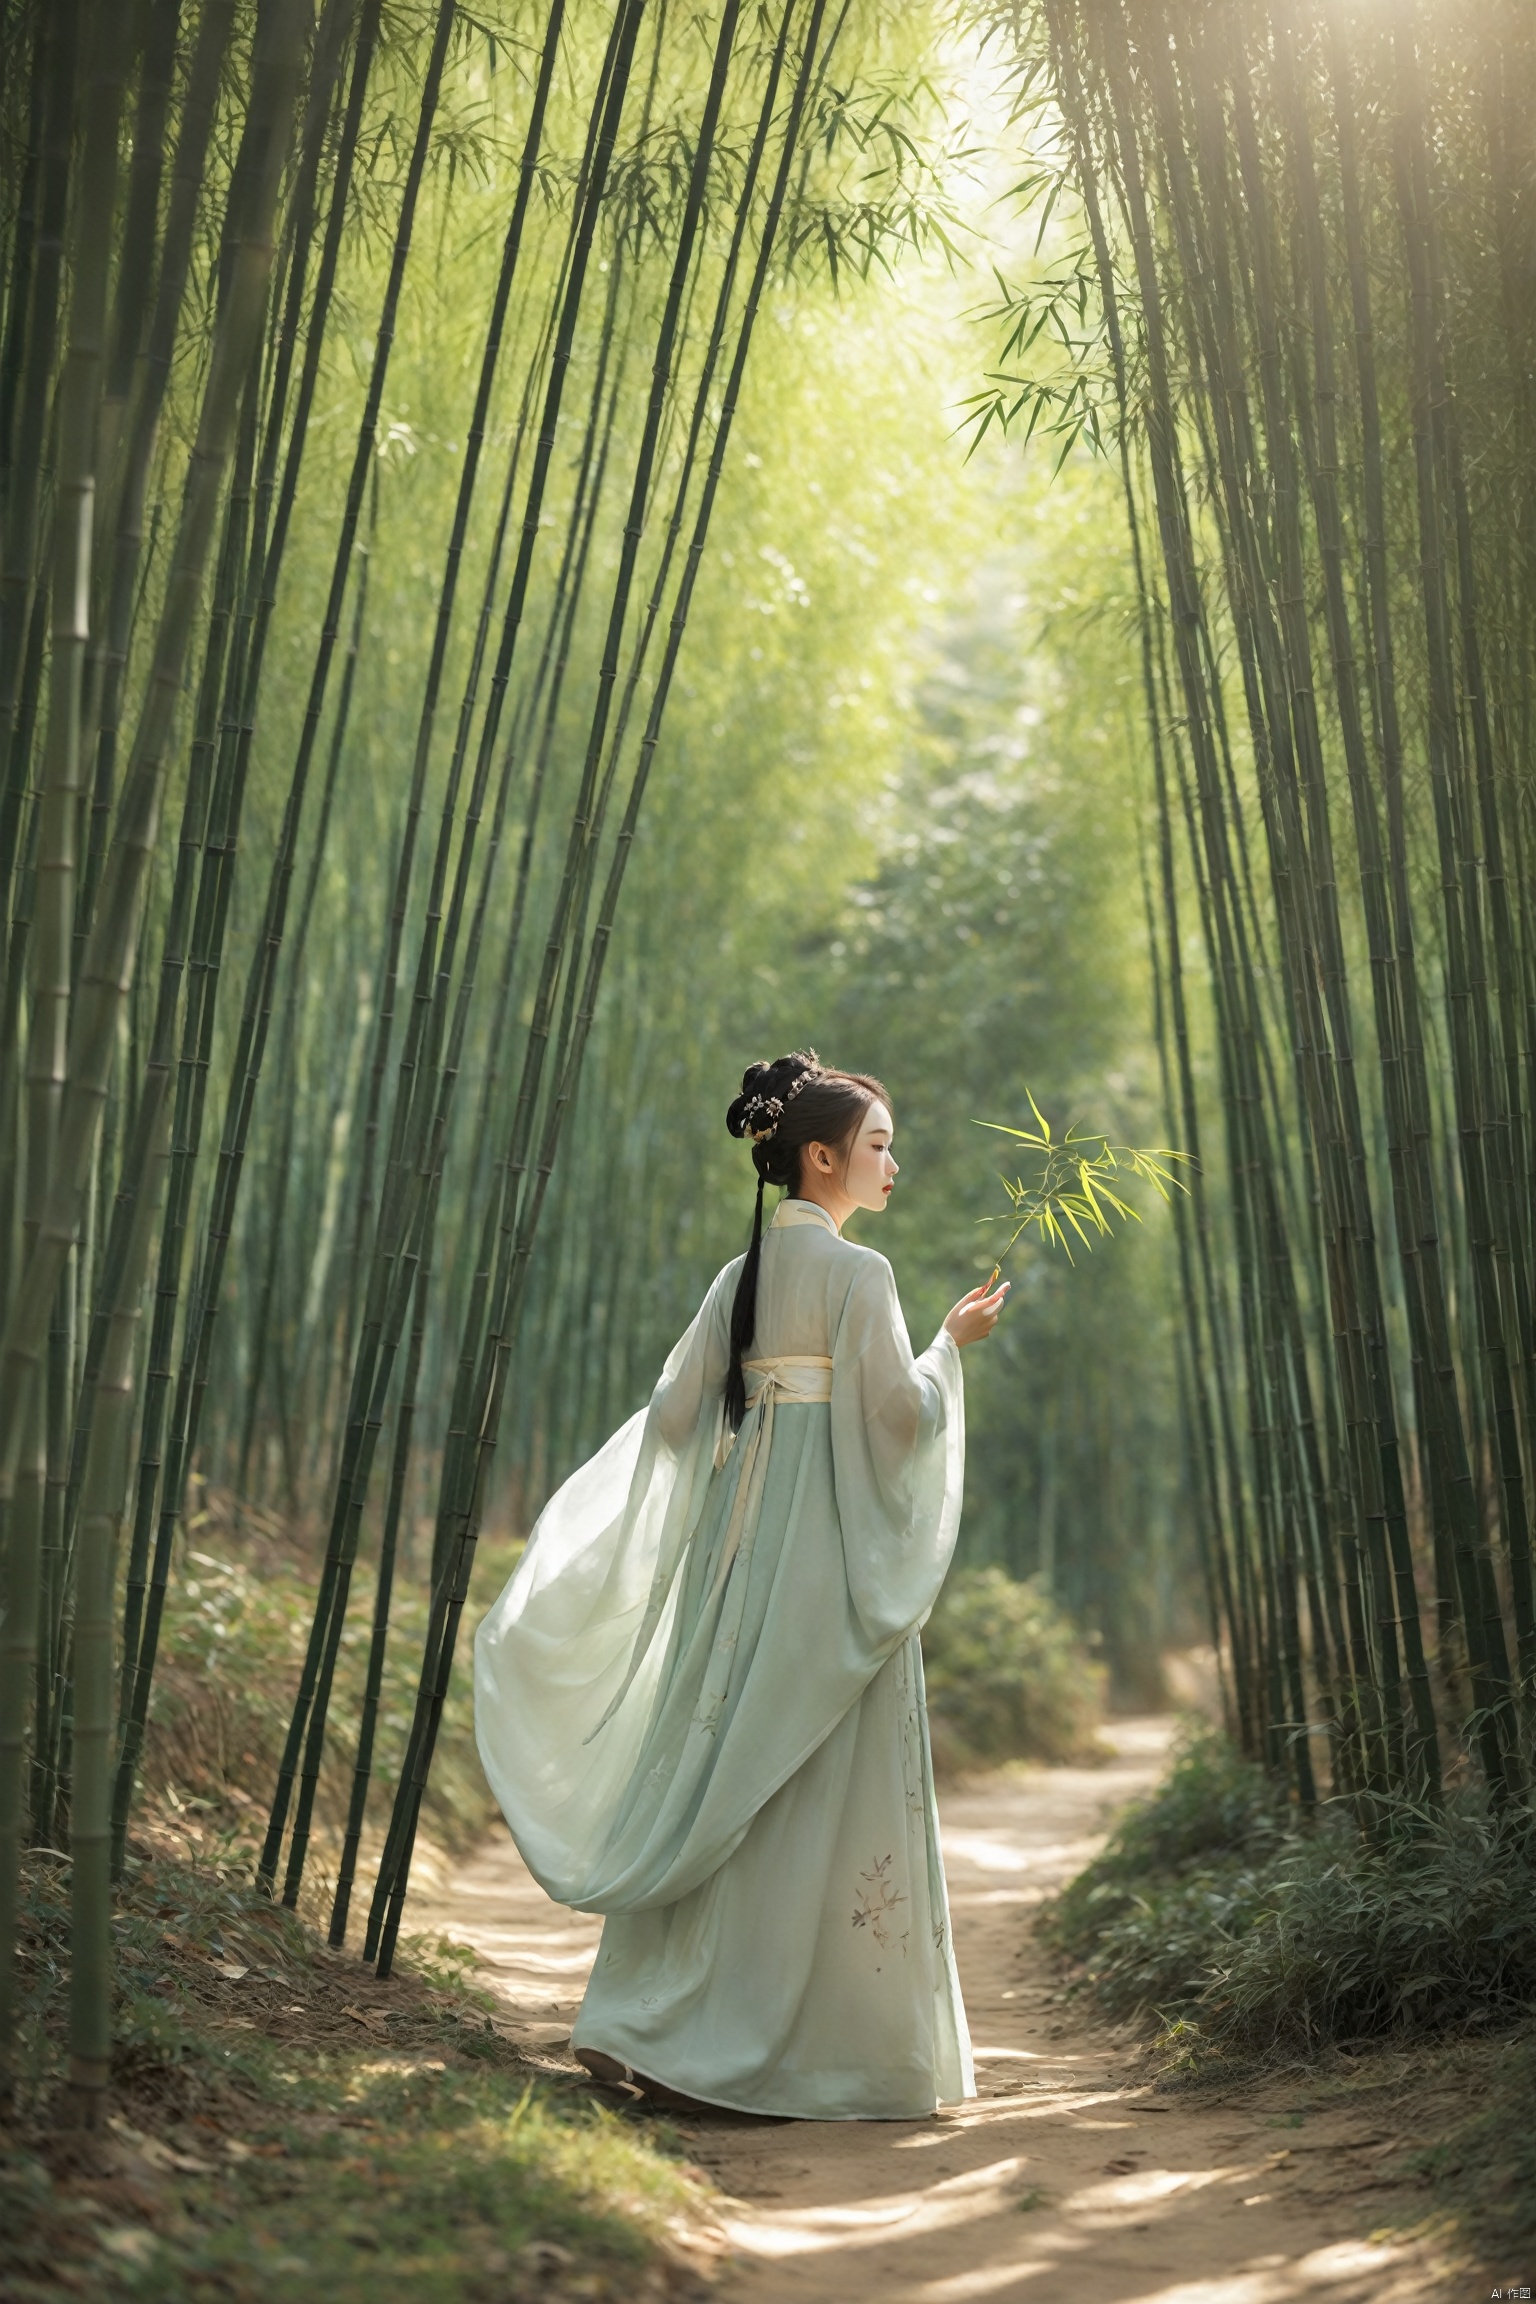 hanfu,A young Chinese woman walks through a bamboo forest, the sunlight filtering through the slender stalks, casting dappled shadows on the ground. The forest is alive with the sound of rustling leaves and the occasional chirp of a bird. She moves with a sense of calm, her presence blending harmoniously with the natural surroundings. The scene is a peaceful exploration, a moment of connection with the natural world.